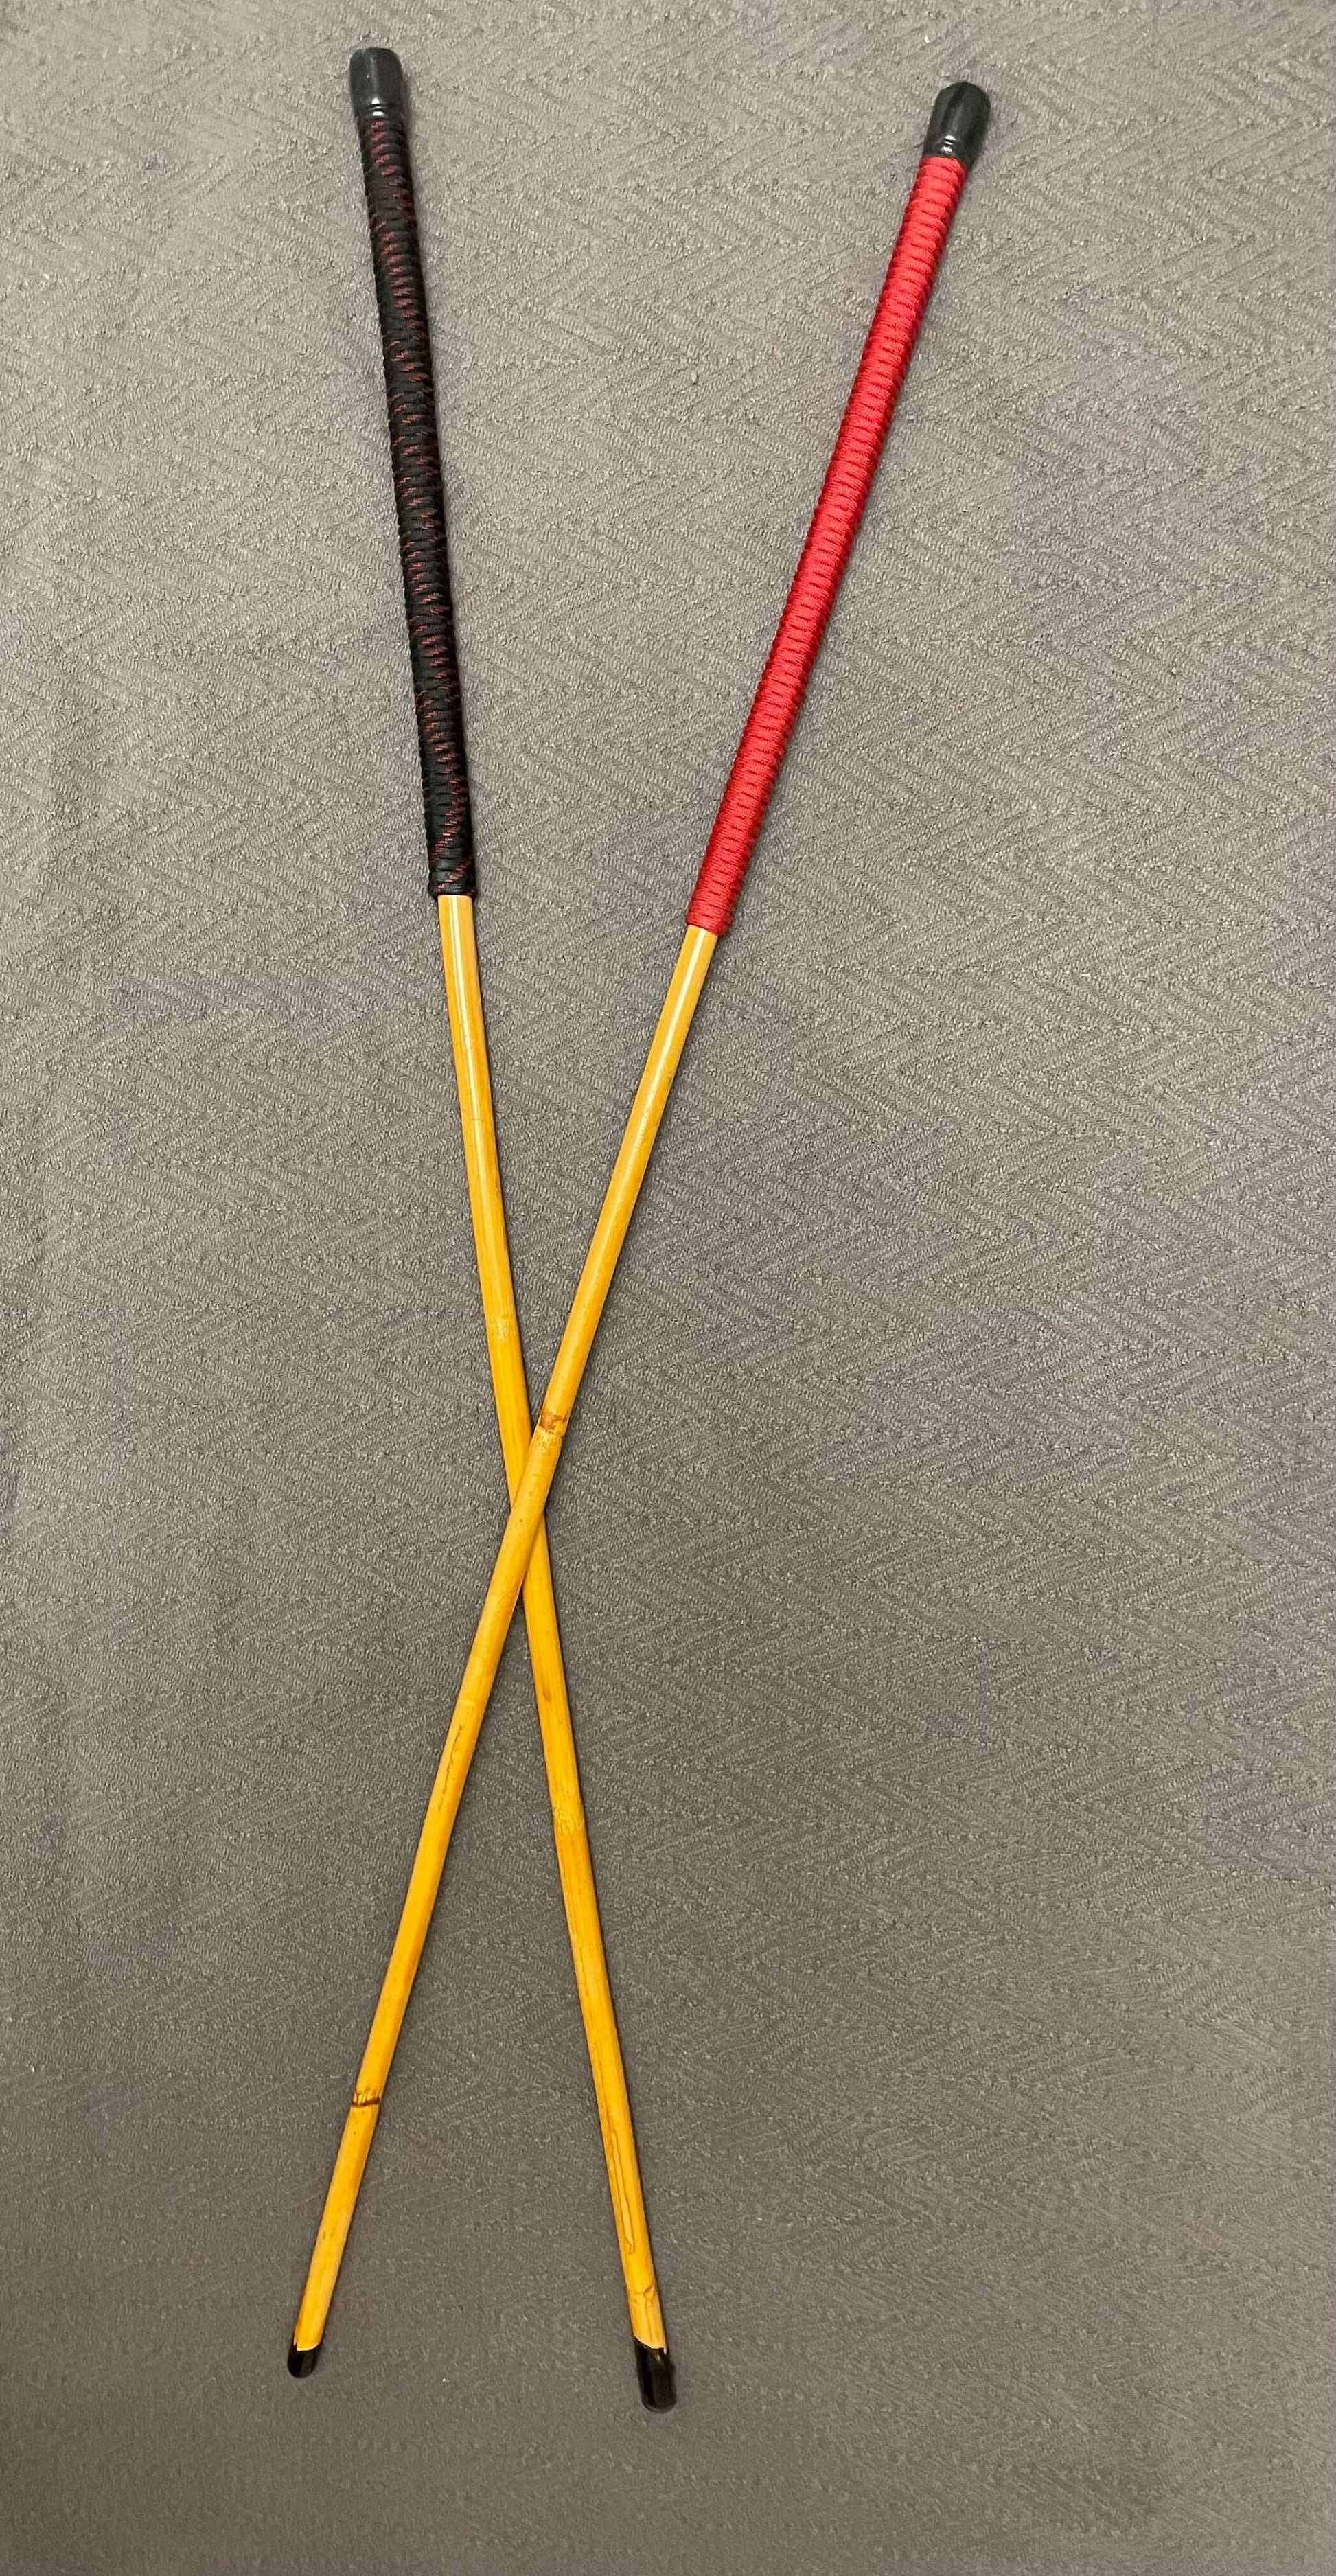 Eton Limited Edition Kooboo Rattan School Punishment Cane with Paracord Handles - 87 to 93 cms Length - 11.5 - 13 mm Diameter